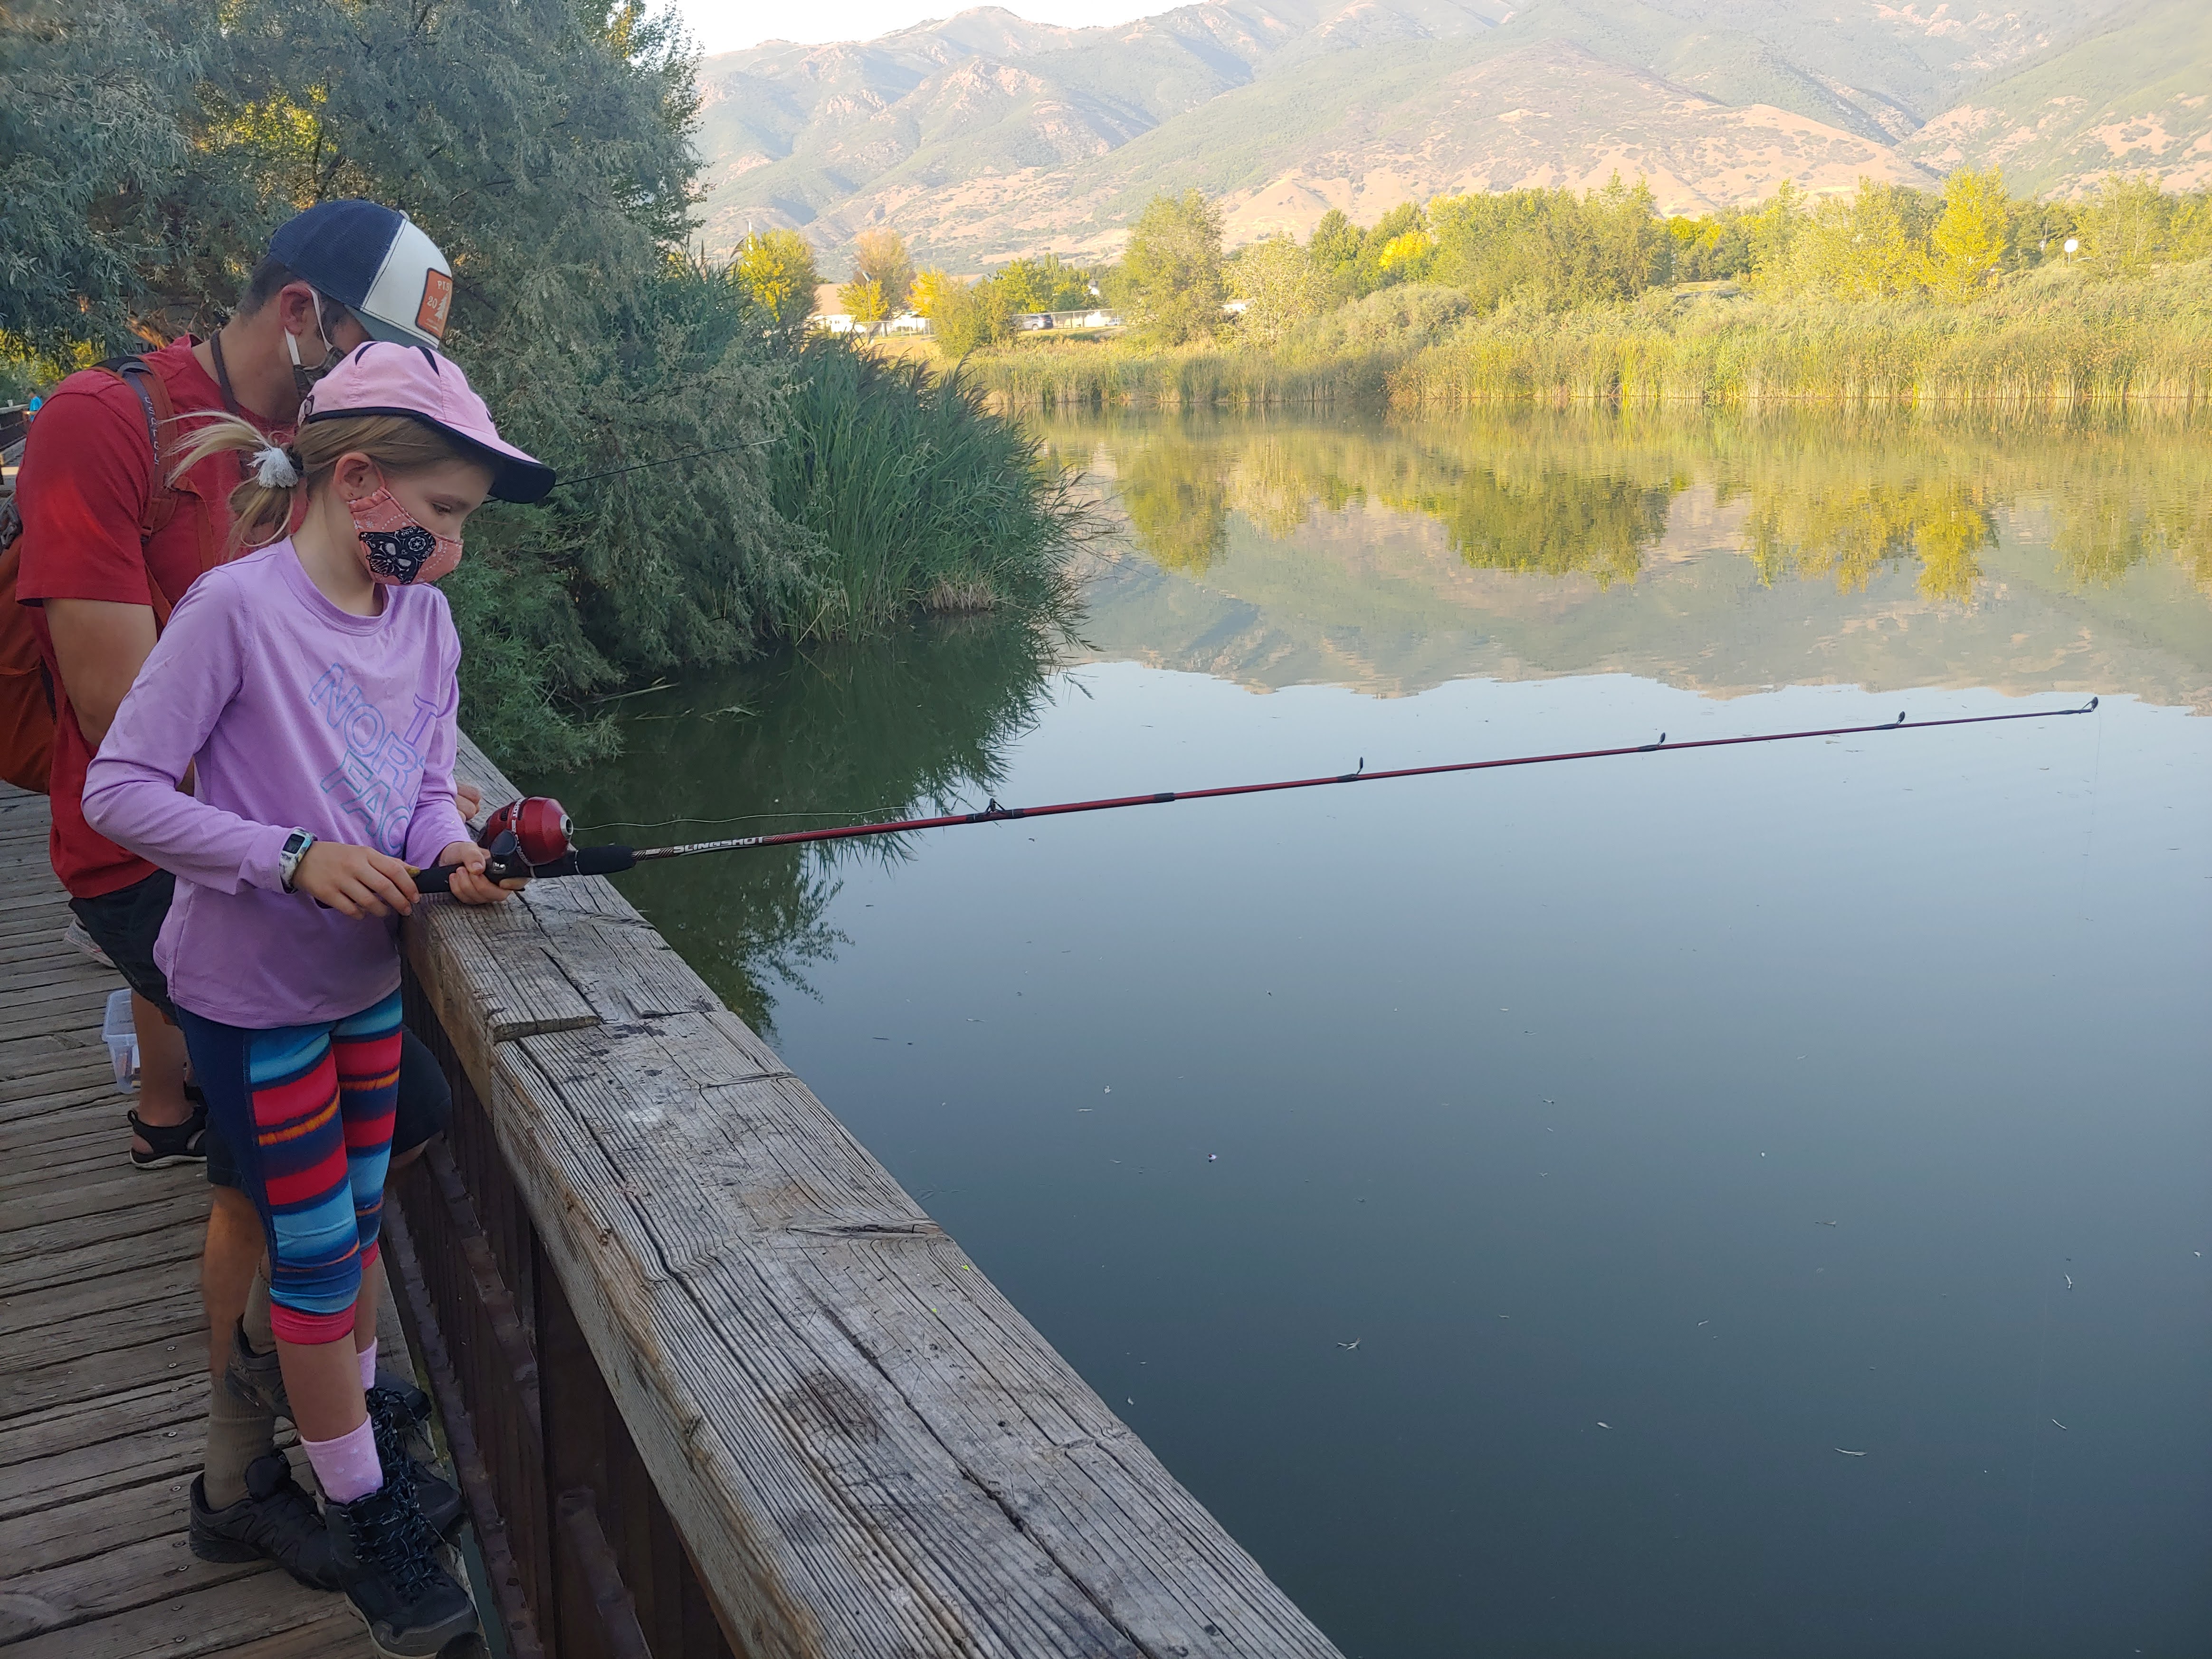 youth fishing at ponds